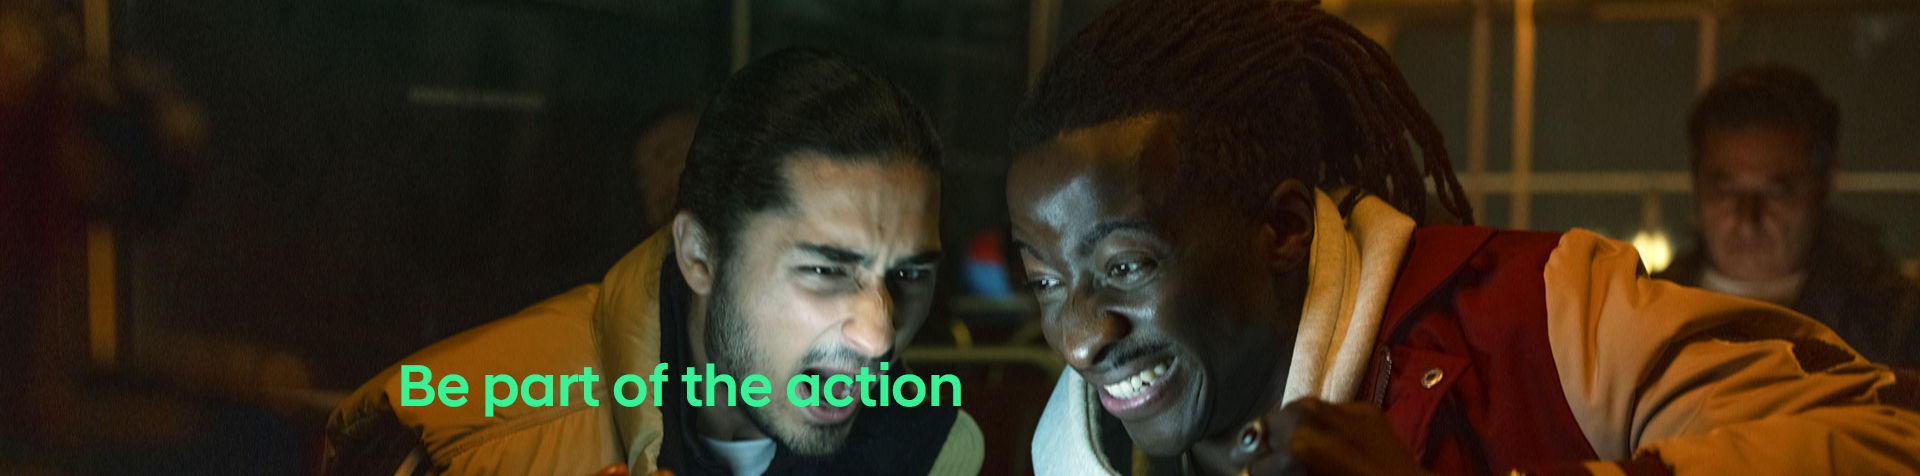 A close-up of the faces of two men watching a game of football and cheering. “Be part of the action” is written in green across the image.